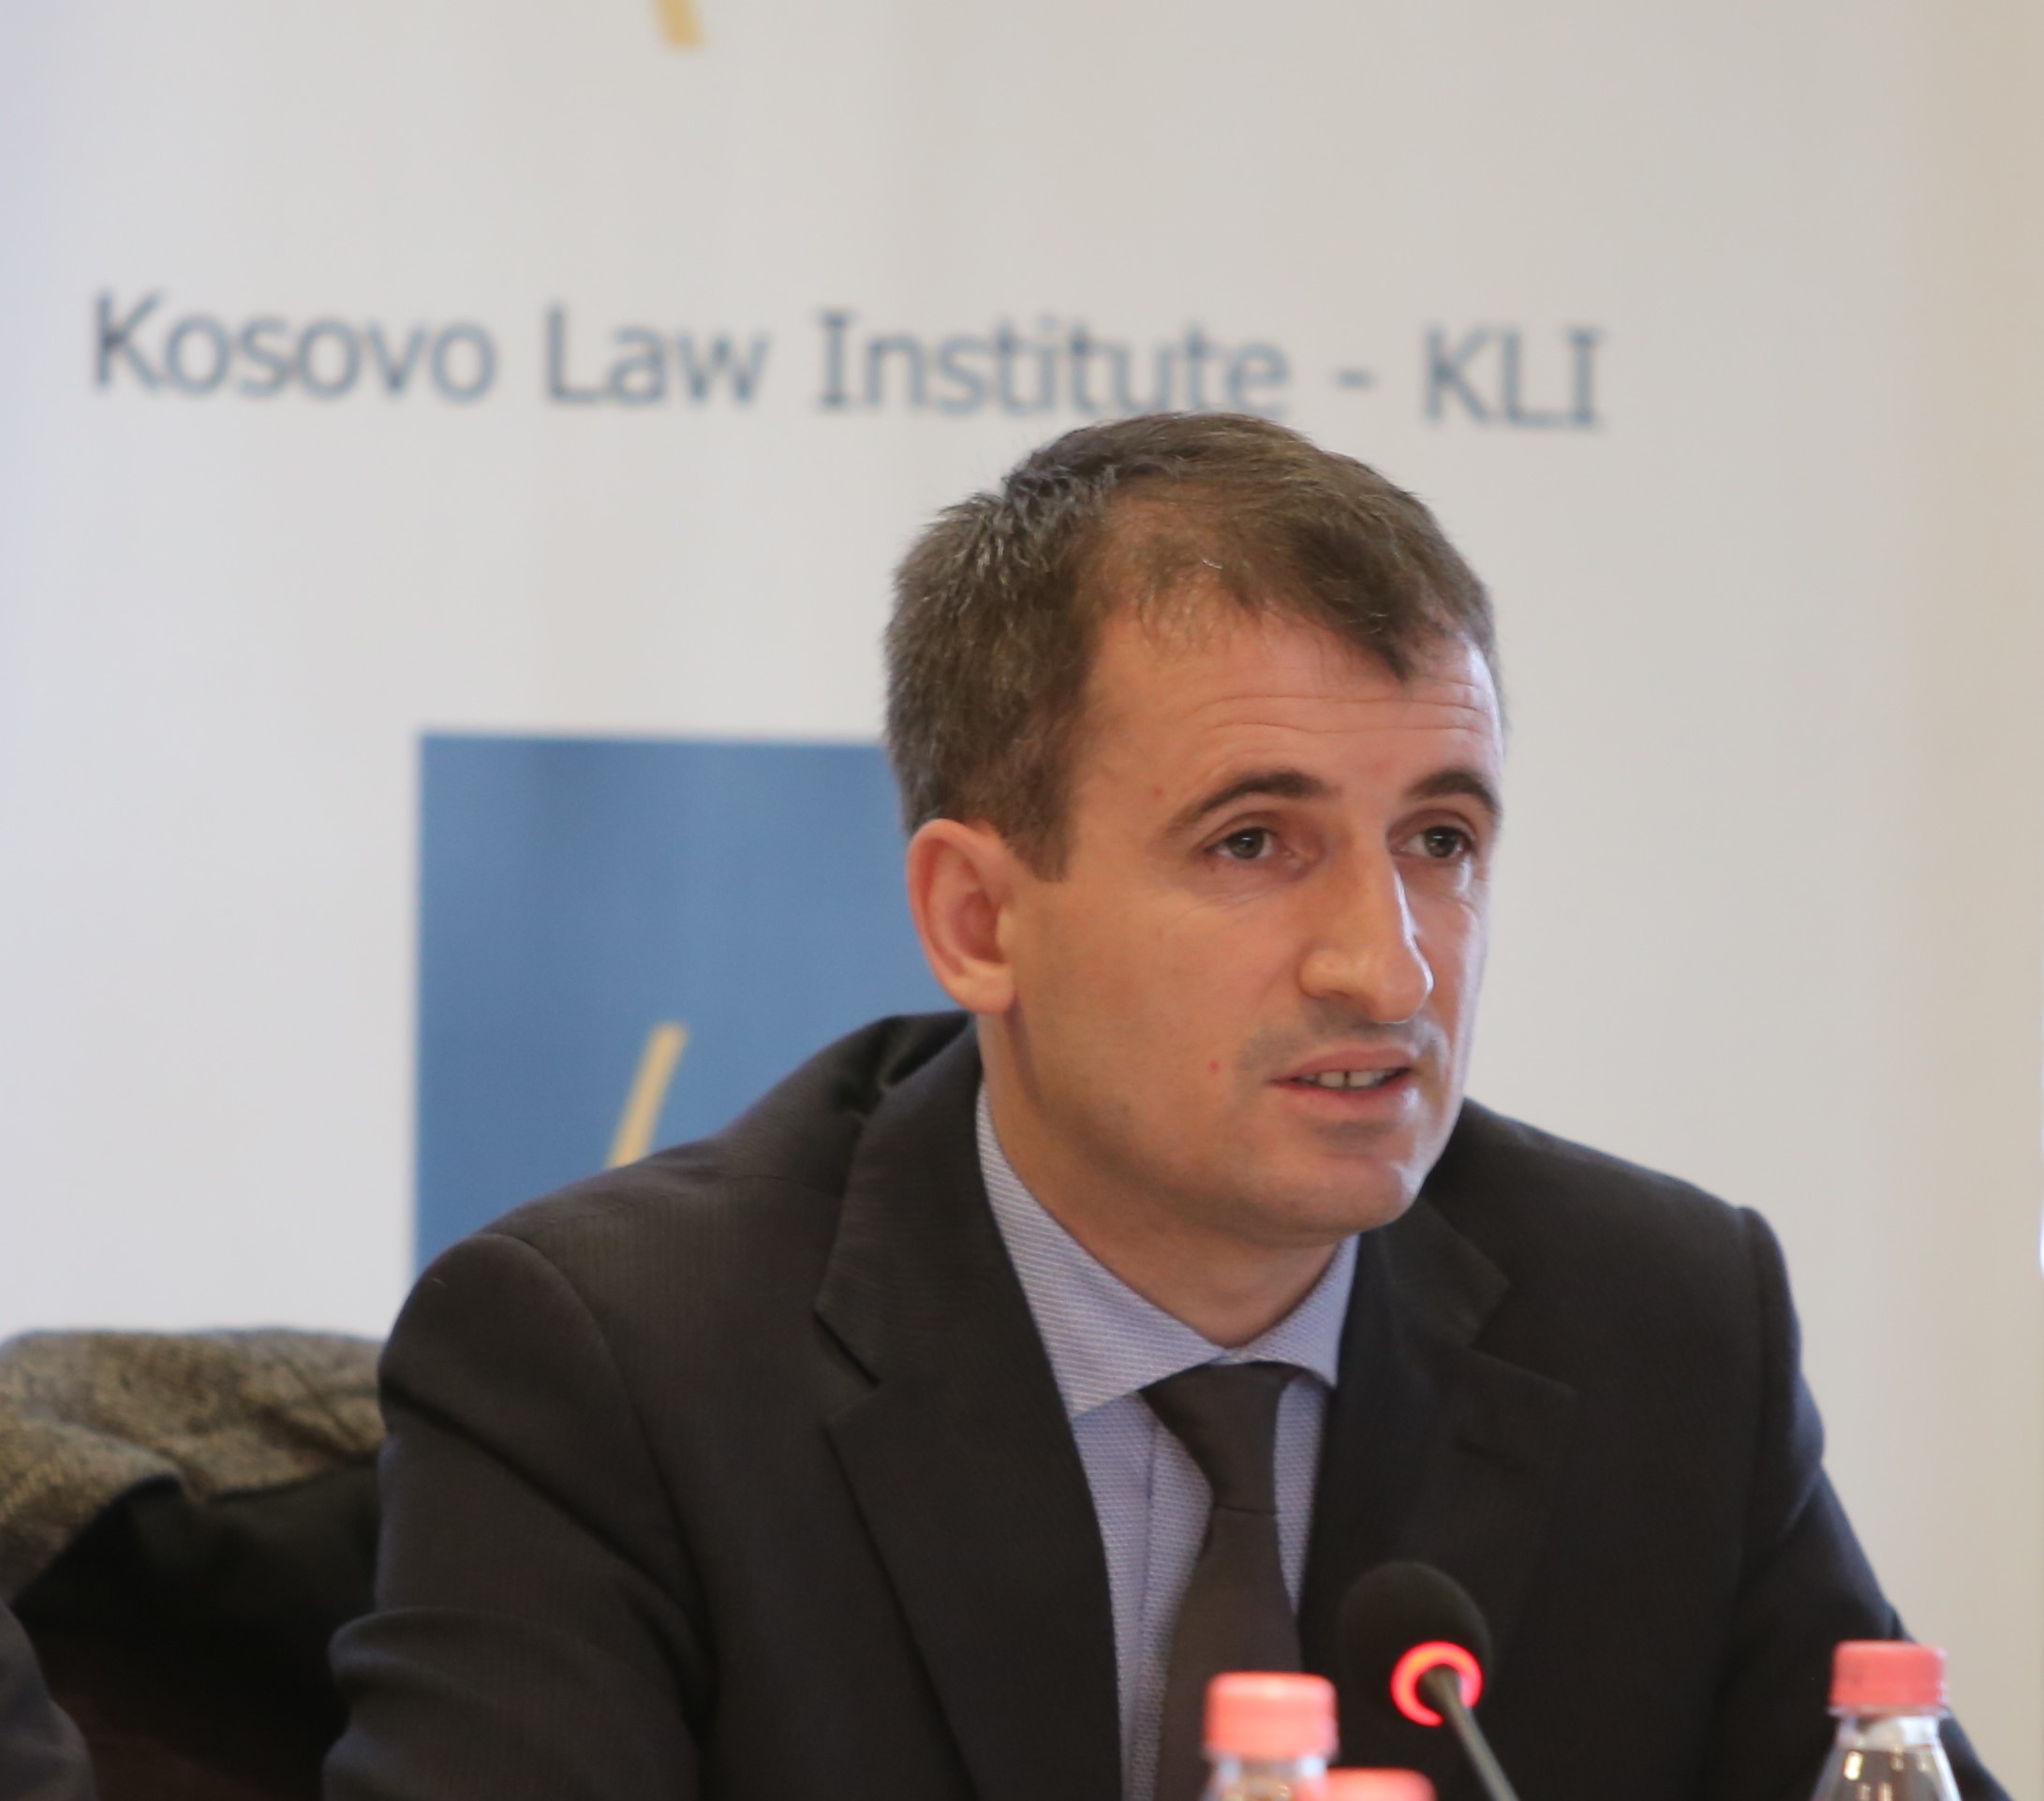 Assembly members of the KLI has elected for the Executive Director Mr. Ehat Miftaraj